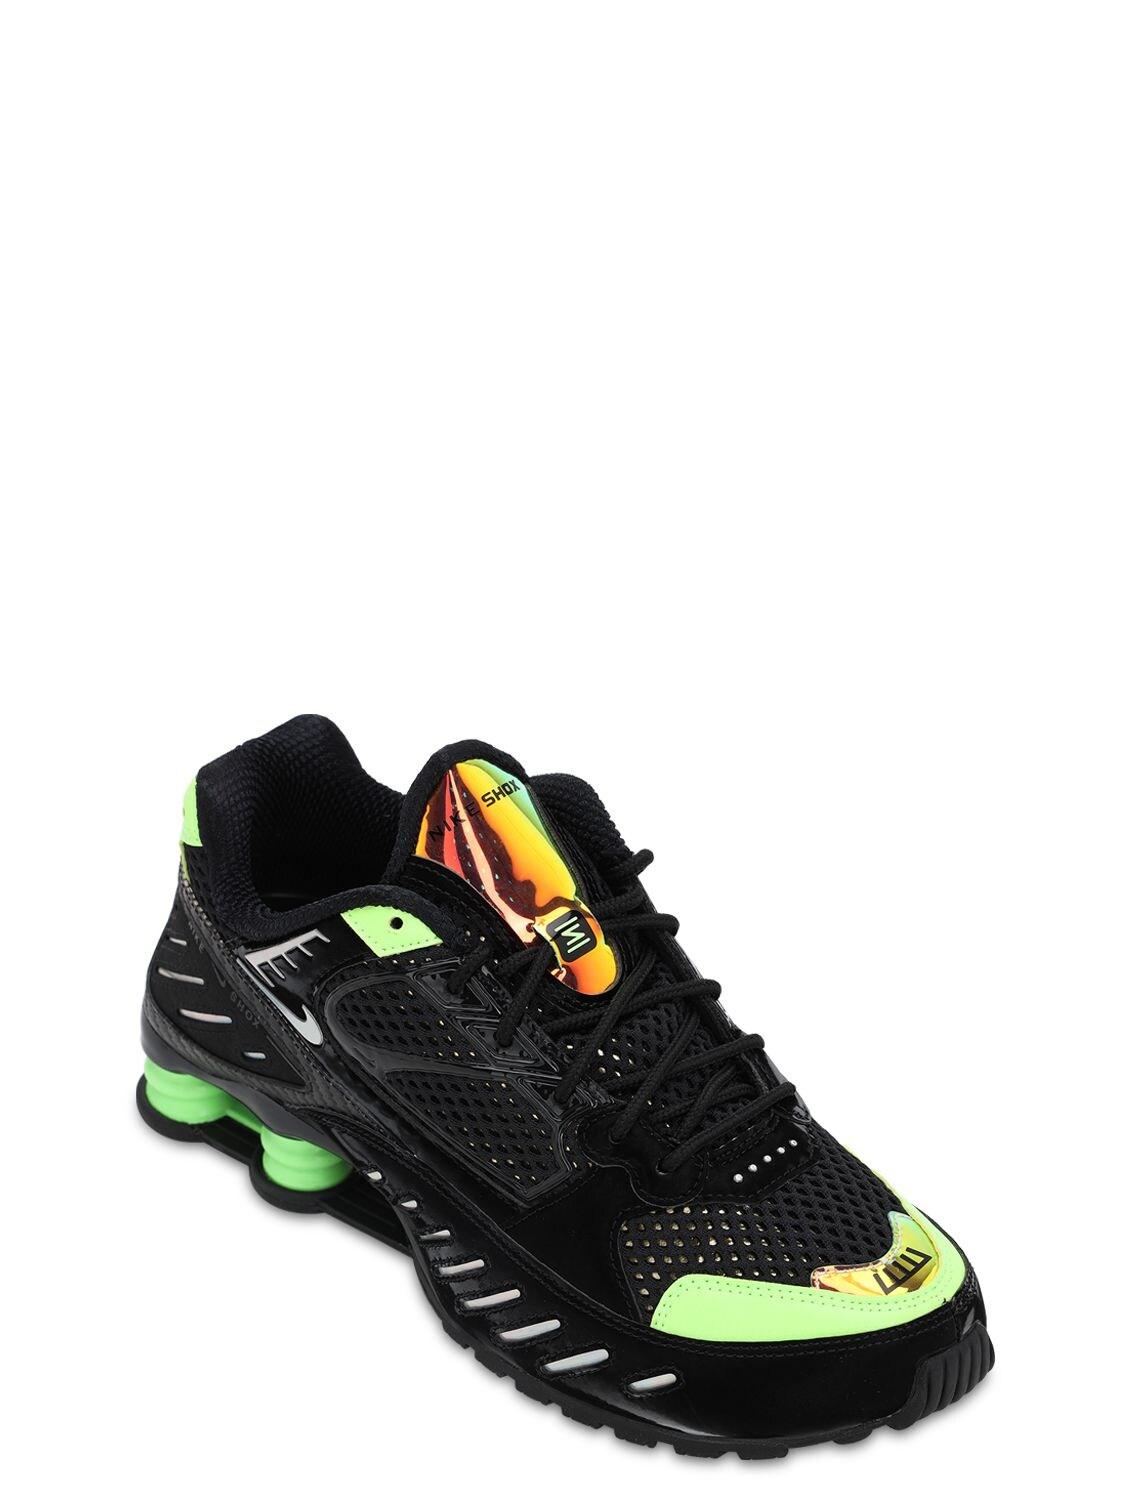 Nike Leather Shox Enigma Trainers in Black/Lime (Black) | Lyst